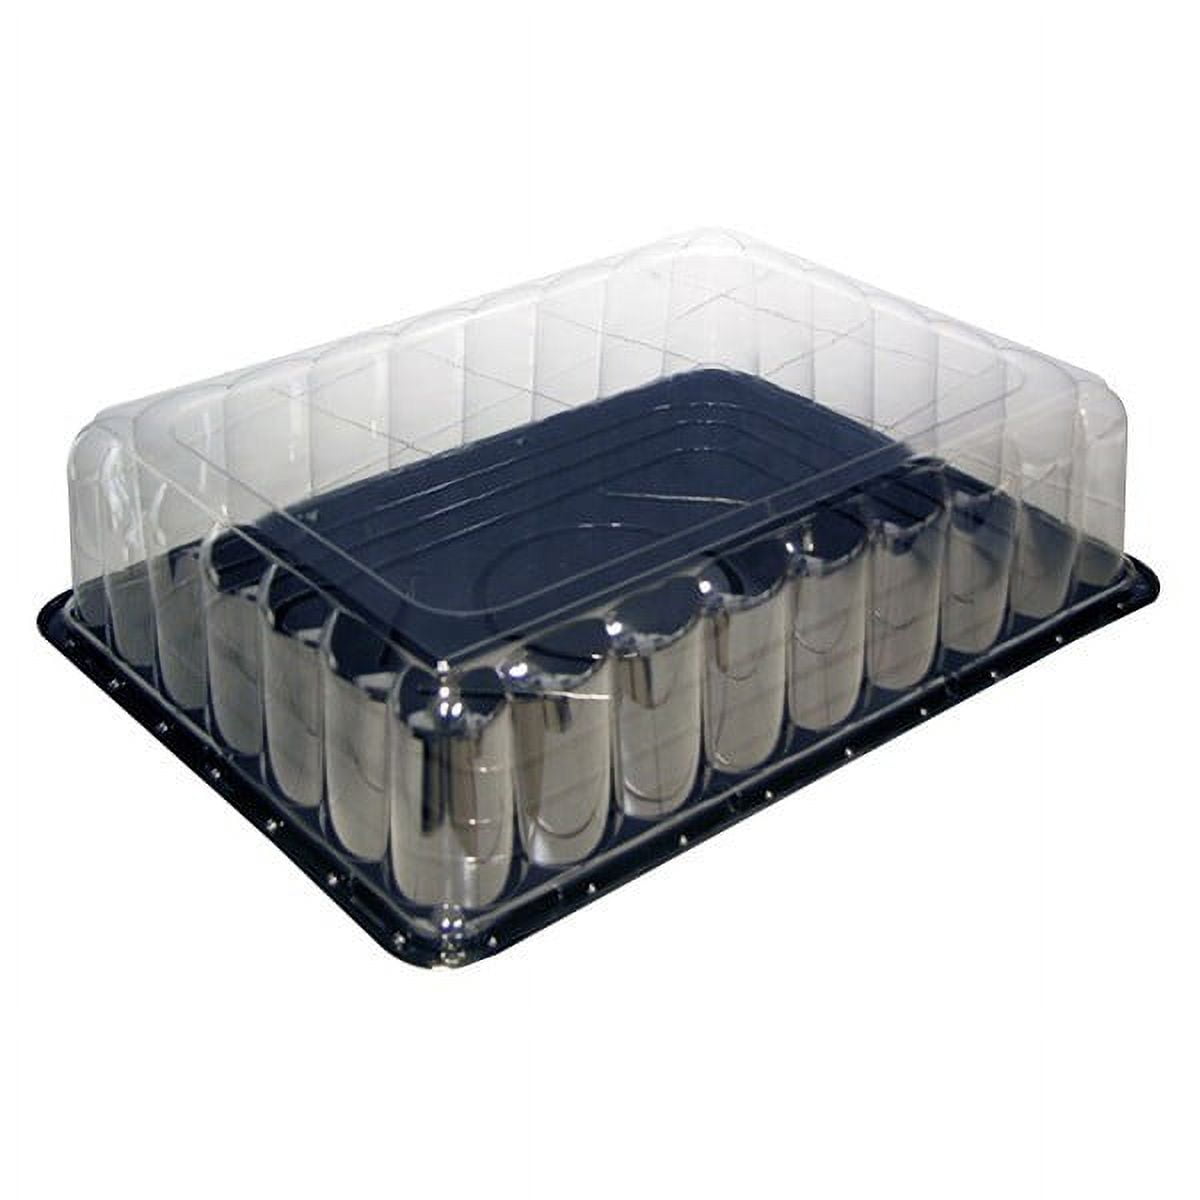 Pactiv Polypropylene Black Base Hot Fried Food Display Takeout Container with Clear Dome Lid, 24 Ounce Capacity -- 105 per Case